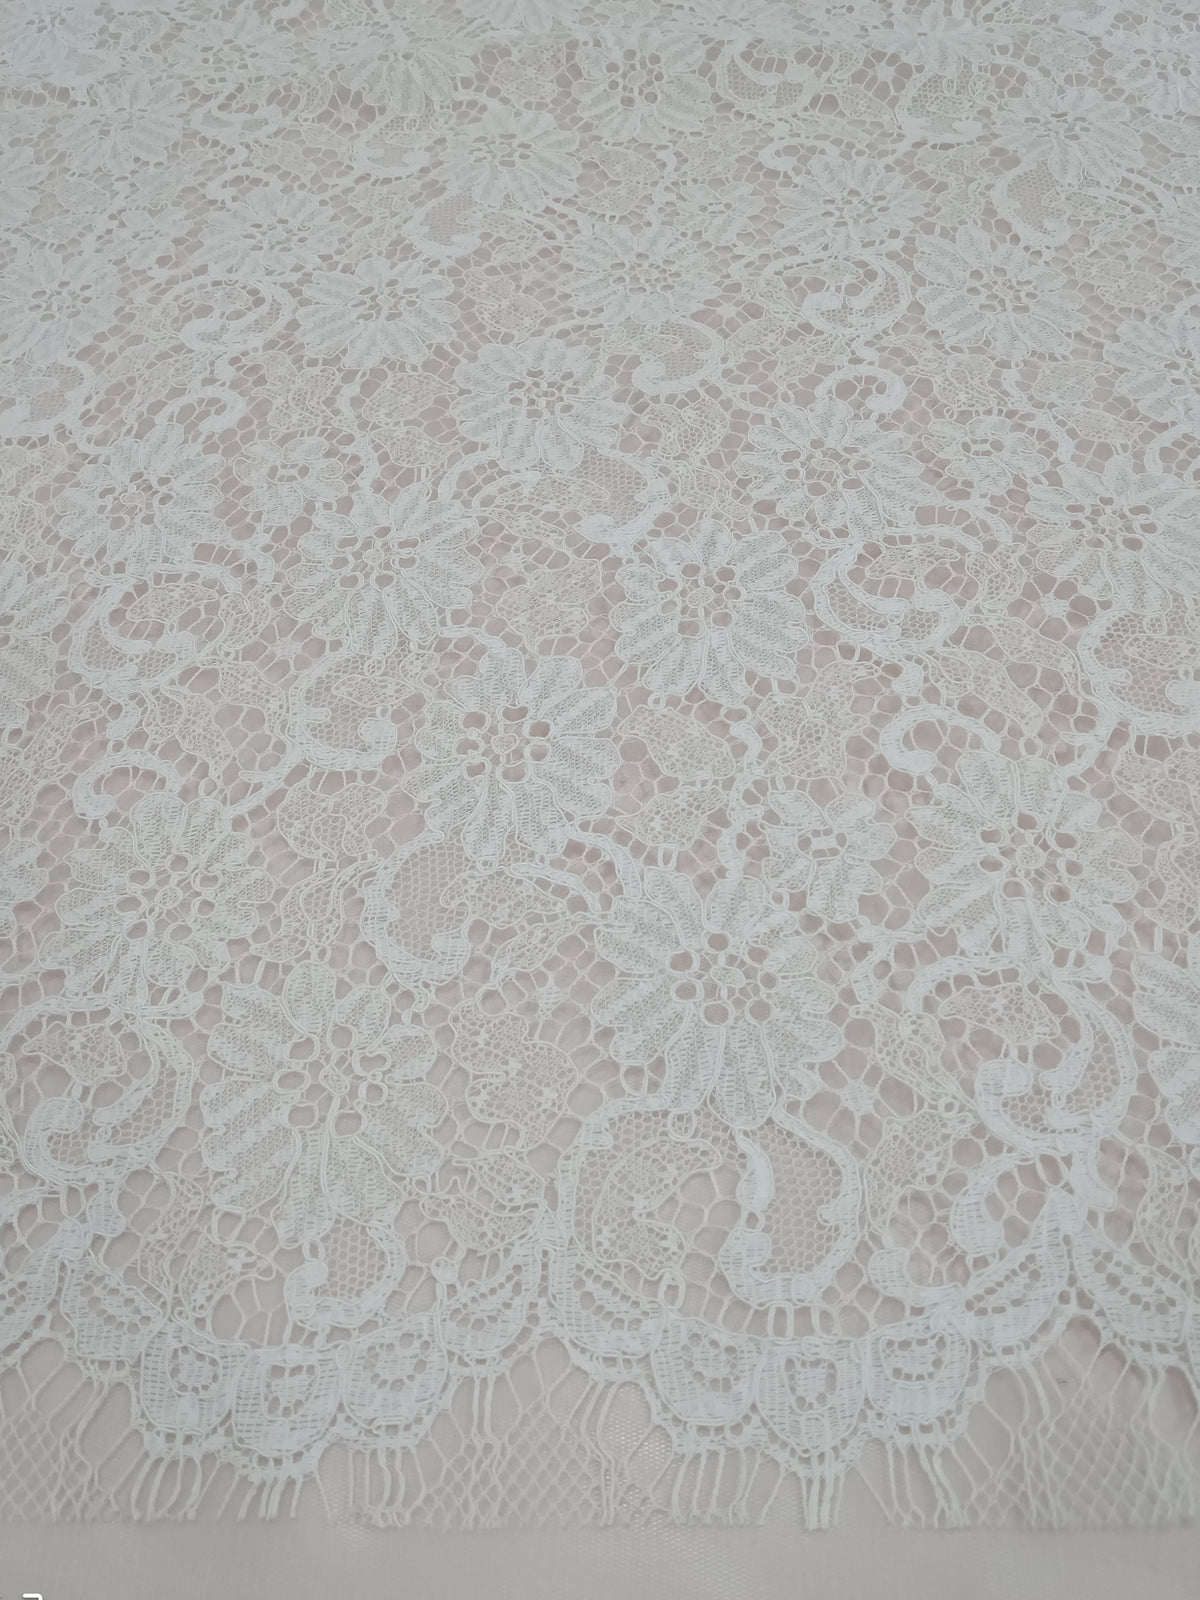 FRENCH CHANTILLY LACE - OFF WHITE